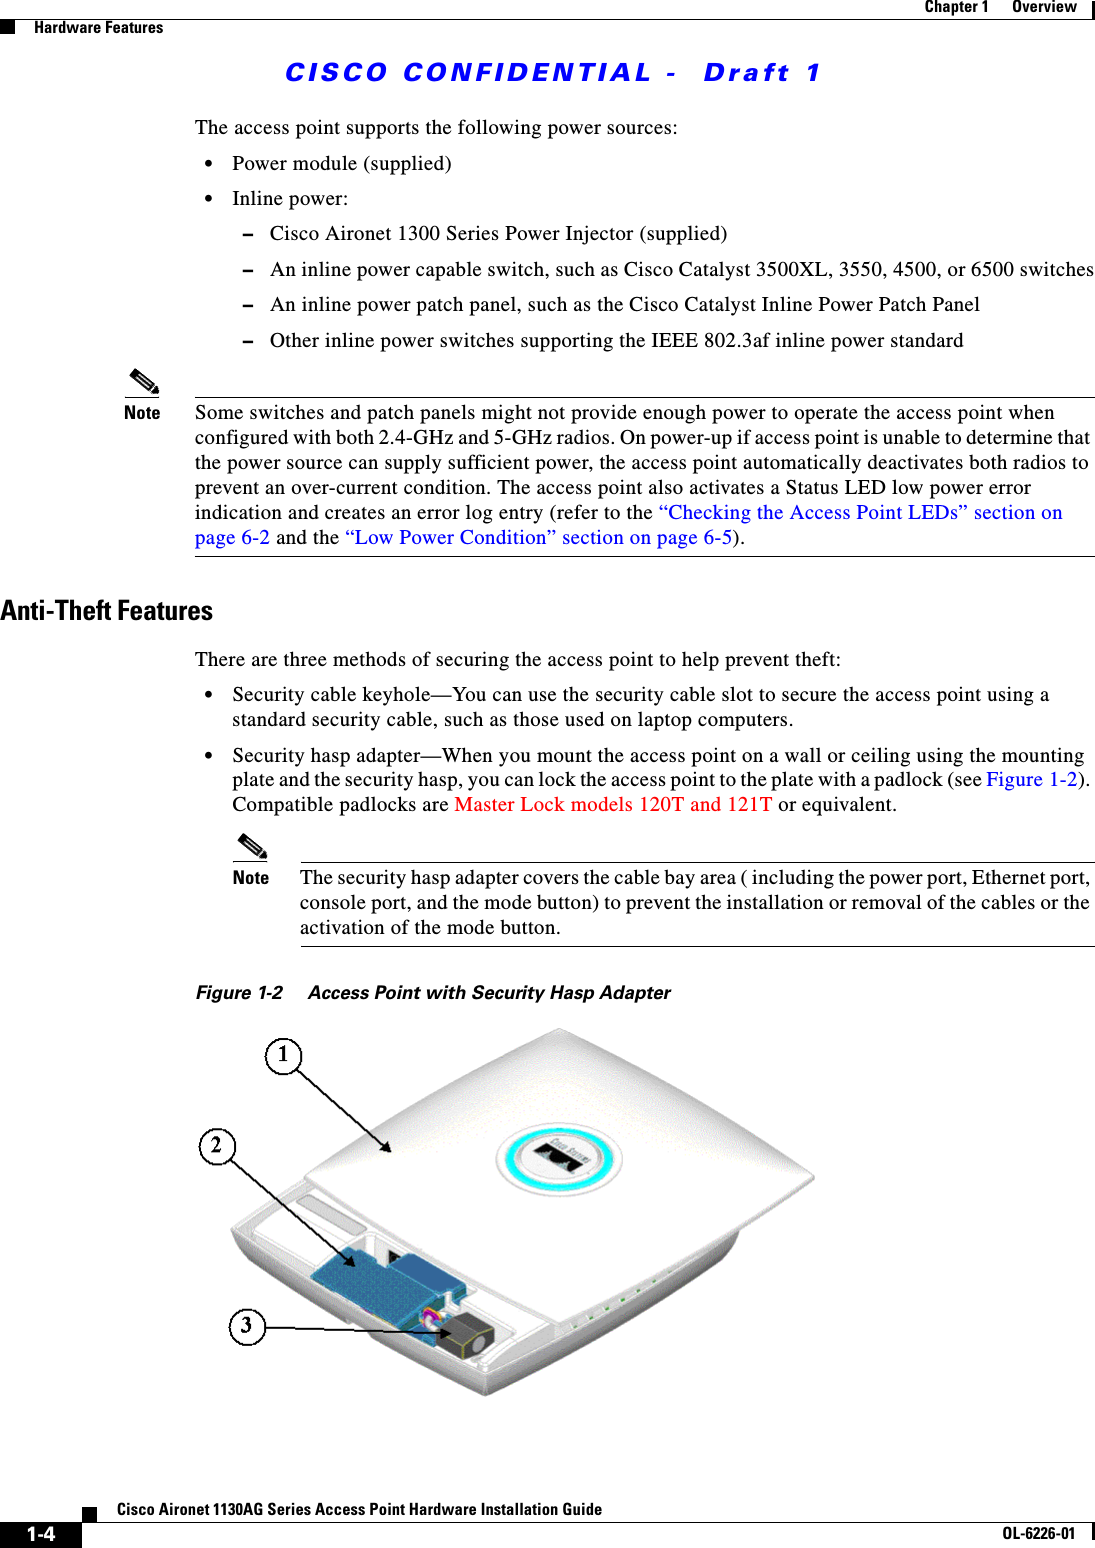  CISCO CONFIDENTIAL -  Draft 11-4Cisco Aironet 1130AG Series Access Point Hardware Installation GuideOL-6226-01Chapter 1      OverviewHardware FeaturesThe access point supports the following power sources:•Power module (supplied)•Inline power:–Cisco Aironet 1300 Series Power Injector (supplied)–An inline power capable switch, such as Cisco Catalyst 3500XL, 3550, 4500, or 6500 switches–An inline power patch panel, such as the Cisco Catalyst Inline Power Patch Panel–Other inline power switches supporting the IEEE 802.3af inline power standardNote Some switches and patch panels might not provide enough power to operate the access point when configured with both 2.4-GHz and 5-GHz radios. On power-up if access point is unable to determine that the power source can supply sufficient power, the access point automatically deactivates both radios to prevent an over-current condition. The access point also activates a Status LED low power error indication and creates an error log entry (refer to the “Checking the Access Point LEDs” section on page 6-2 and the “Low Power Condition” section on page 6-5).Anti-Theft FeaturesThere are three methods of securing the access point to help prevent theft:•Security cable keyhole—You can use the security cable slot to secure the access point using a standard security cable, such as those used on laptop computers.•Security hasp adapter—When you mount the access point on a wall or ceiling using the mounting plate and the security hasp, you can lock the access point to the plate with a padlock (see Figure 1-2). Compatible padlocks are Master Lock models 120T and 121T or equivalent.Note The security hasp adapter covers the cable bay area ( including the power port, Ethernet port, console port, and the mode button) to prevent the installation or removal of the cables or the activation of the mode button.Figure 1-2 Access Point with Security Hasp Adapter